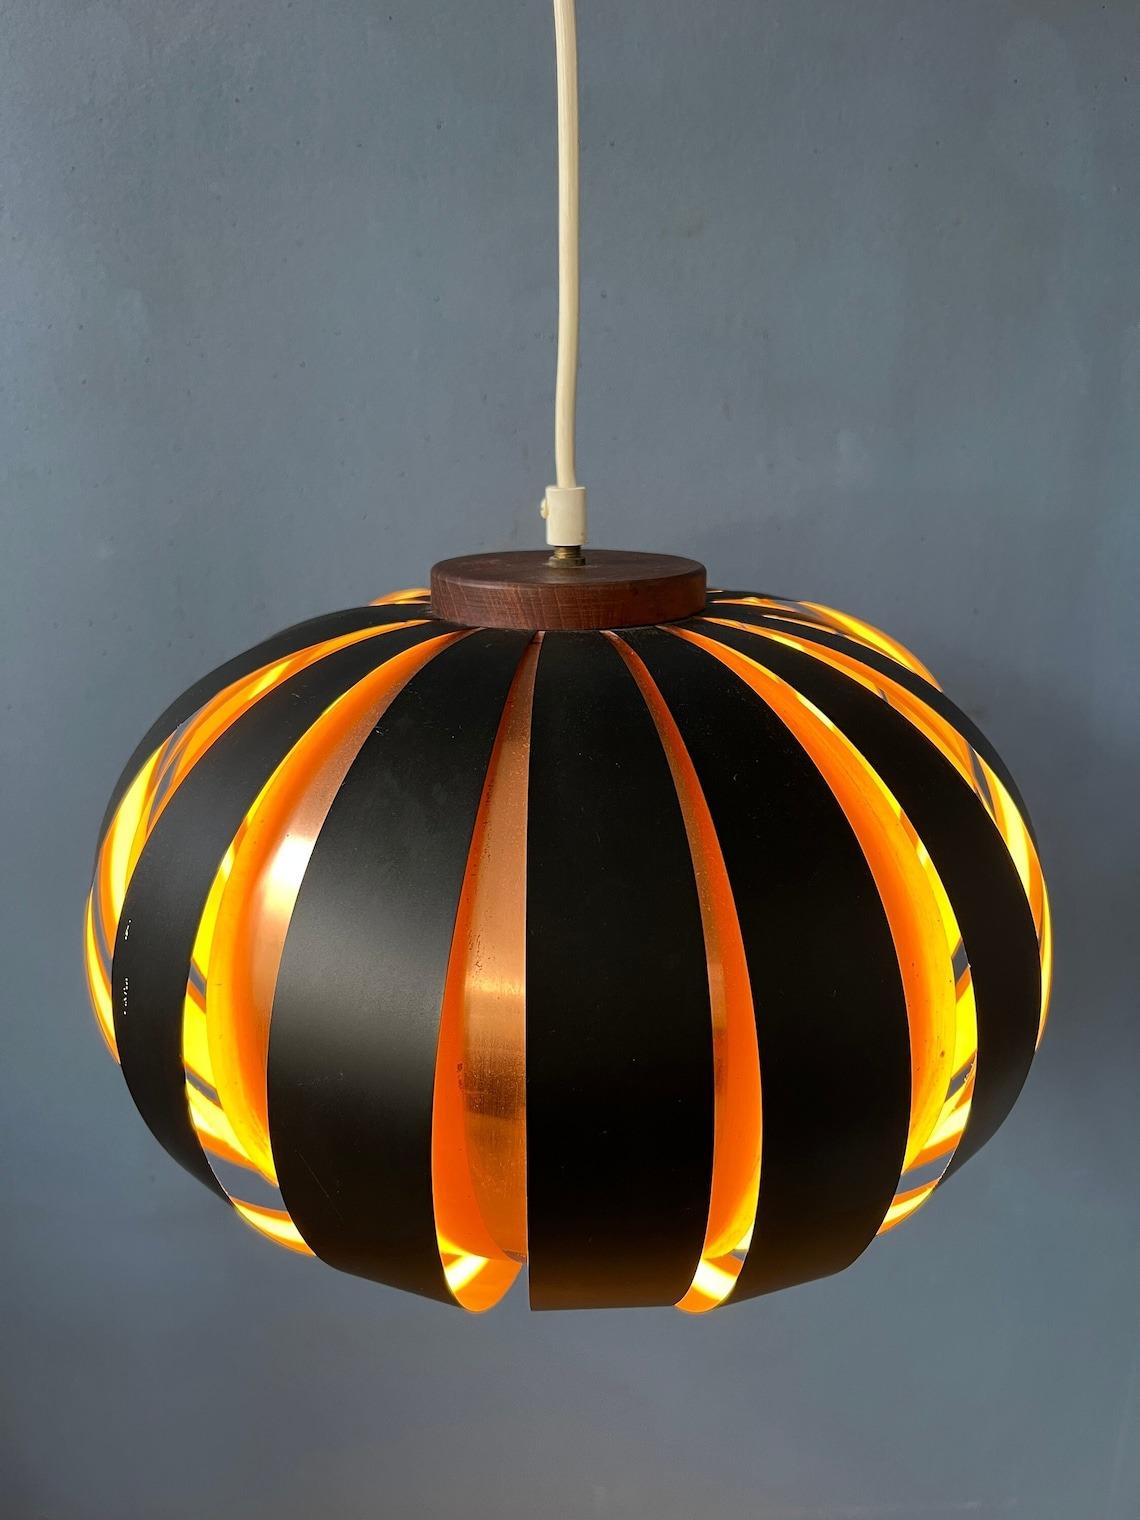 A very special 'moon'-like space age pendant light in the style of Werner Schou. The lamps consists of an acrylic orange/copper coloured outer shade and a white inner shade. The lamp requires one E27 lightbulb and currently has an